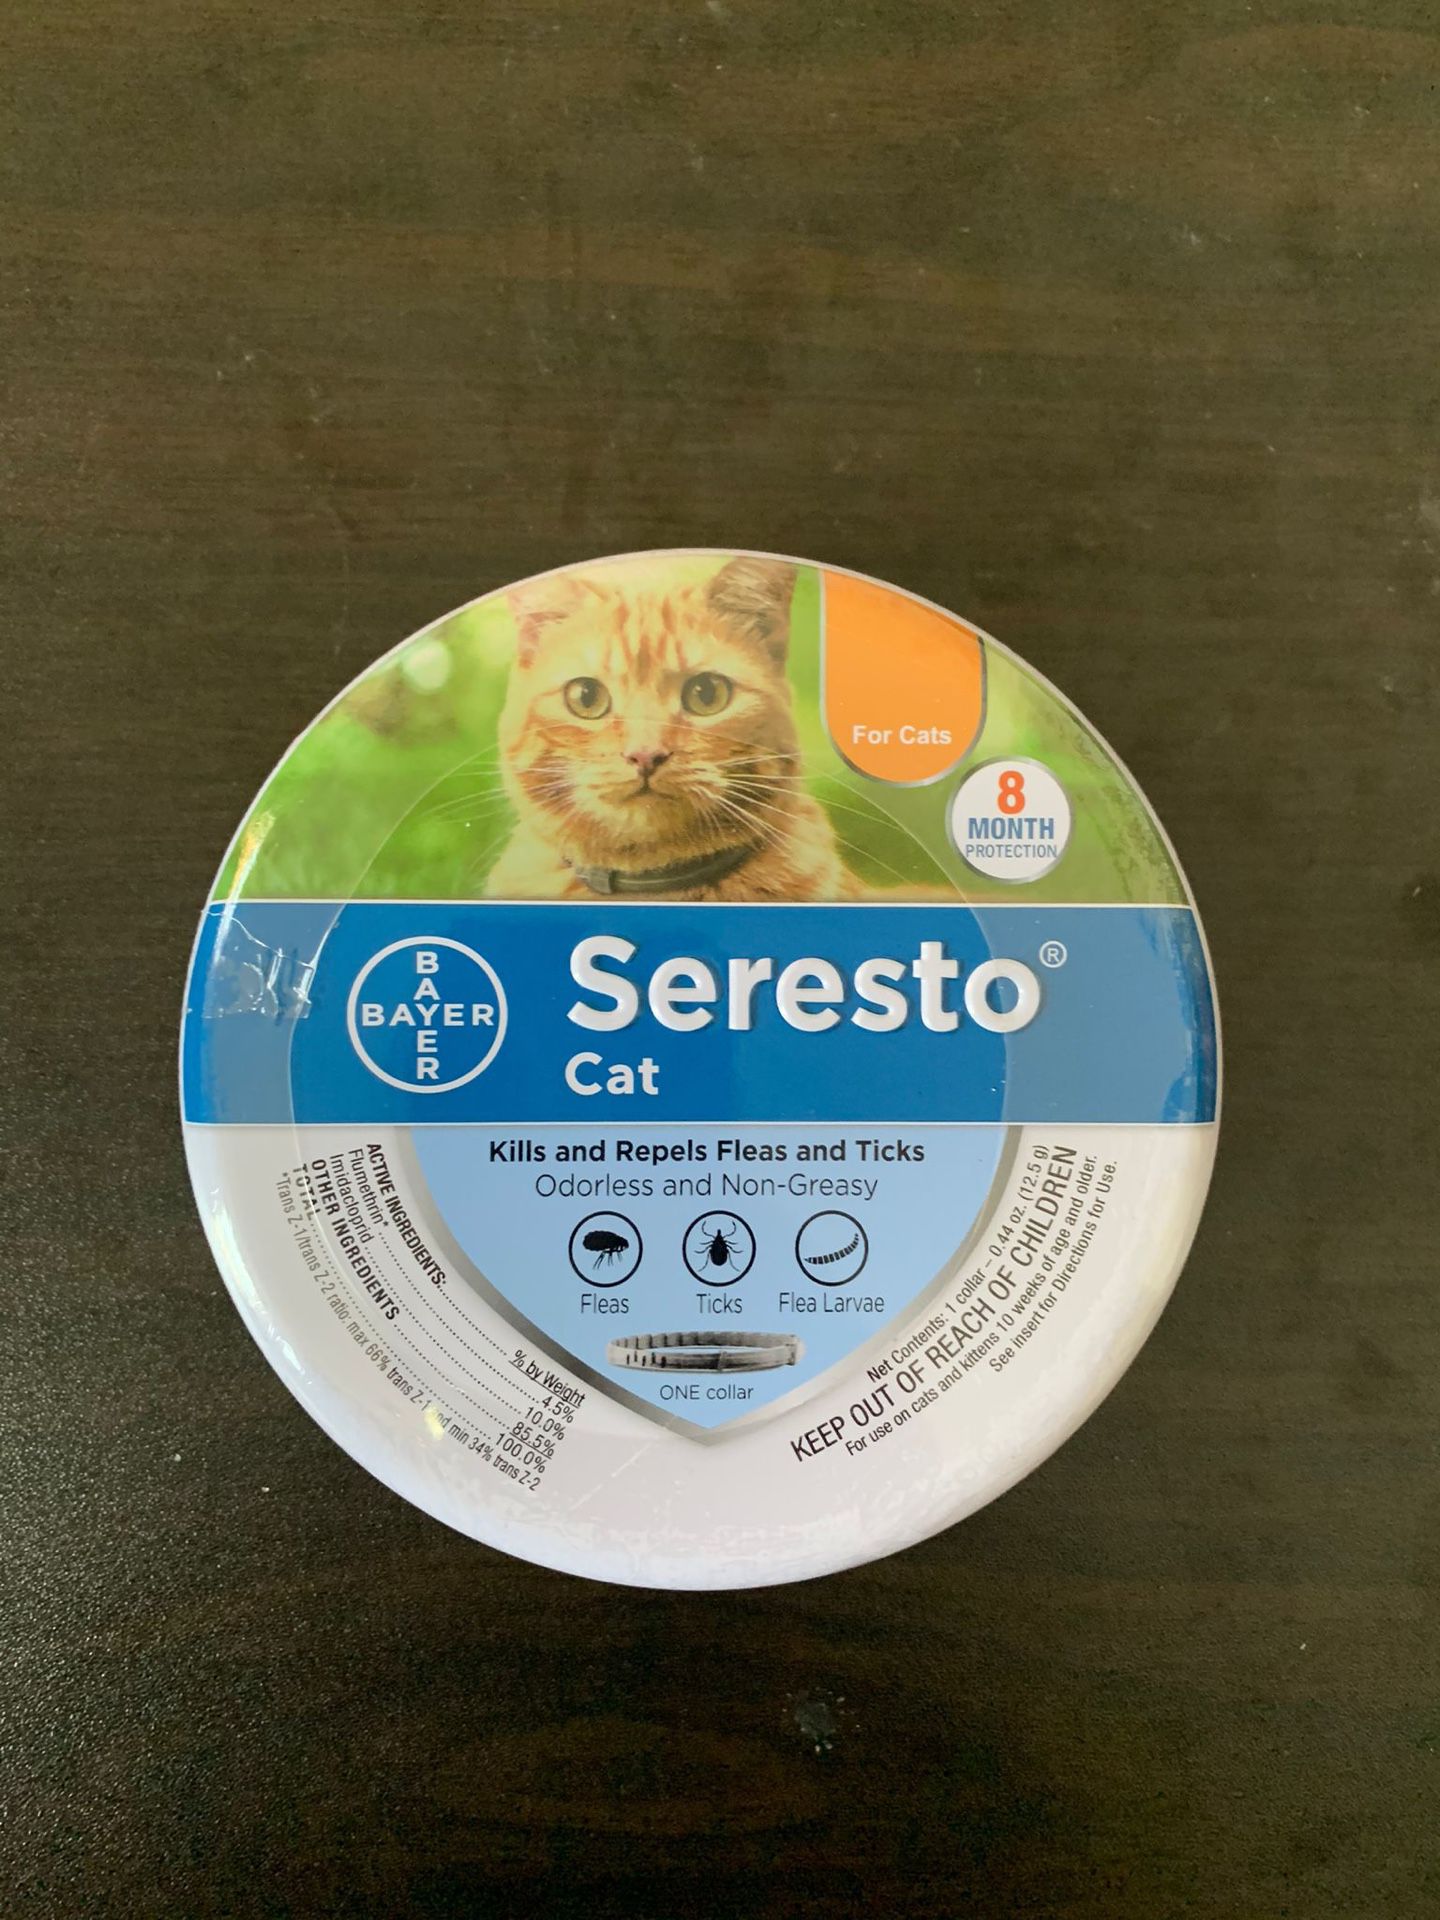 Bayer Seresto Flea and Tick Collar for Cats All Weight 8 Month Protection US 